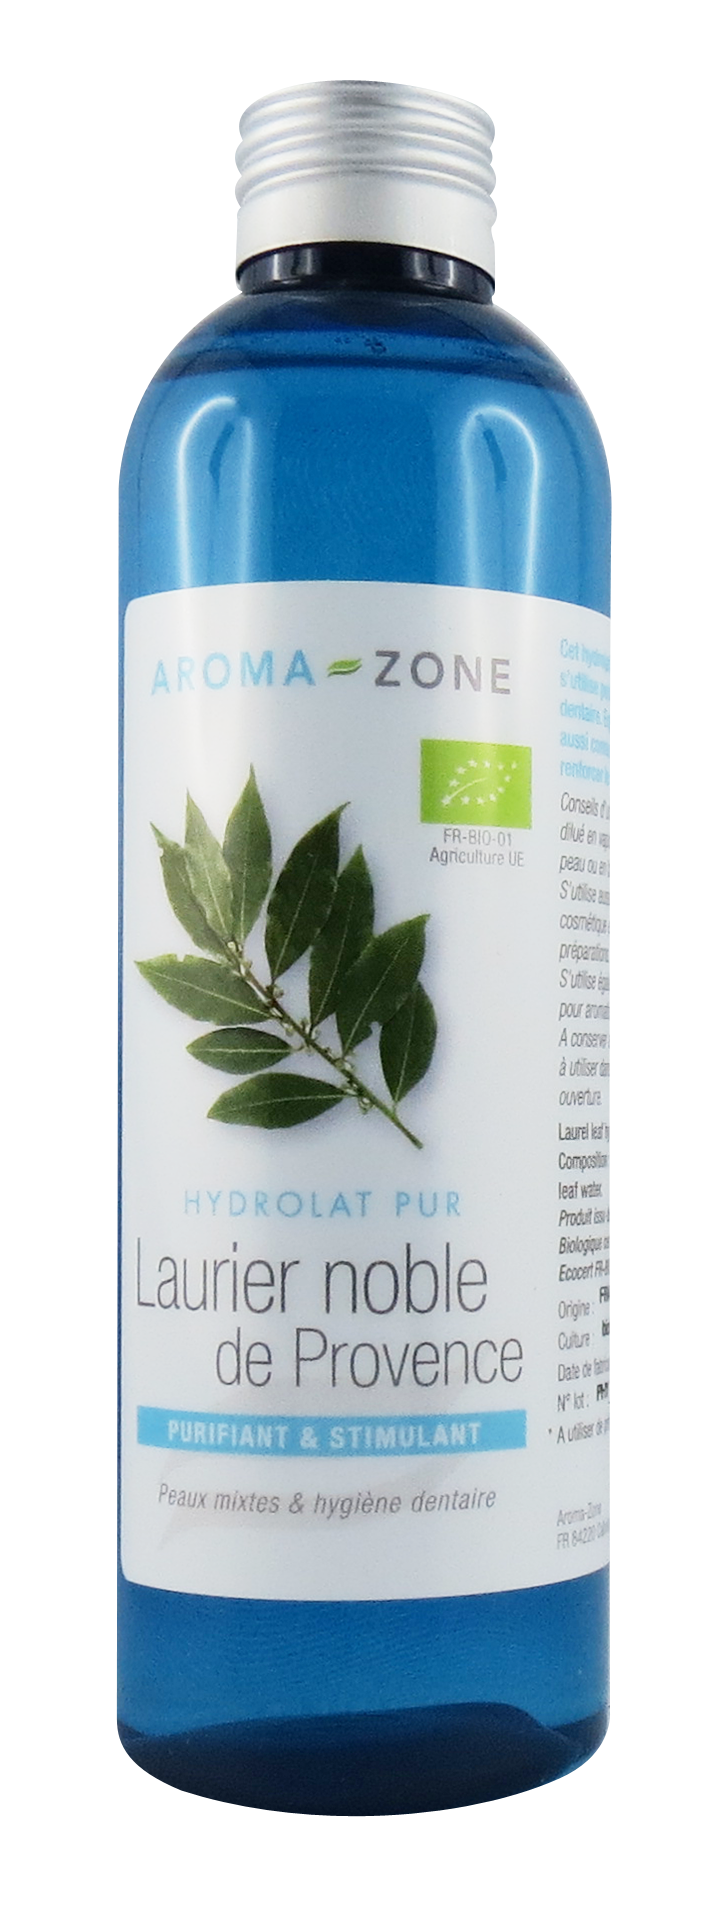 hydrolat laurier noble